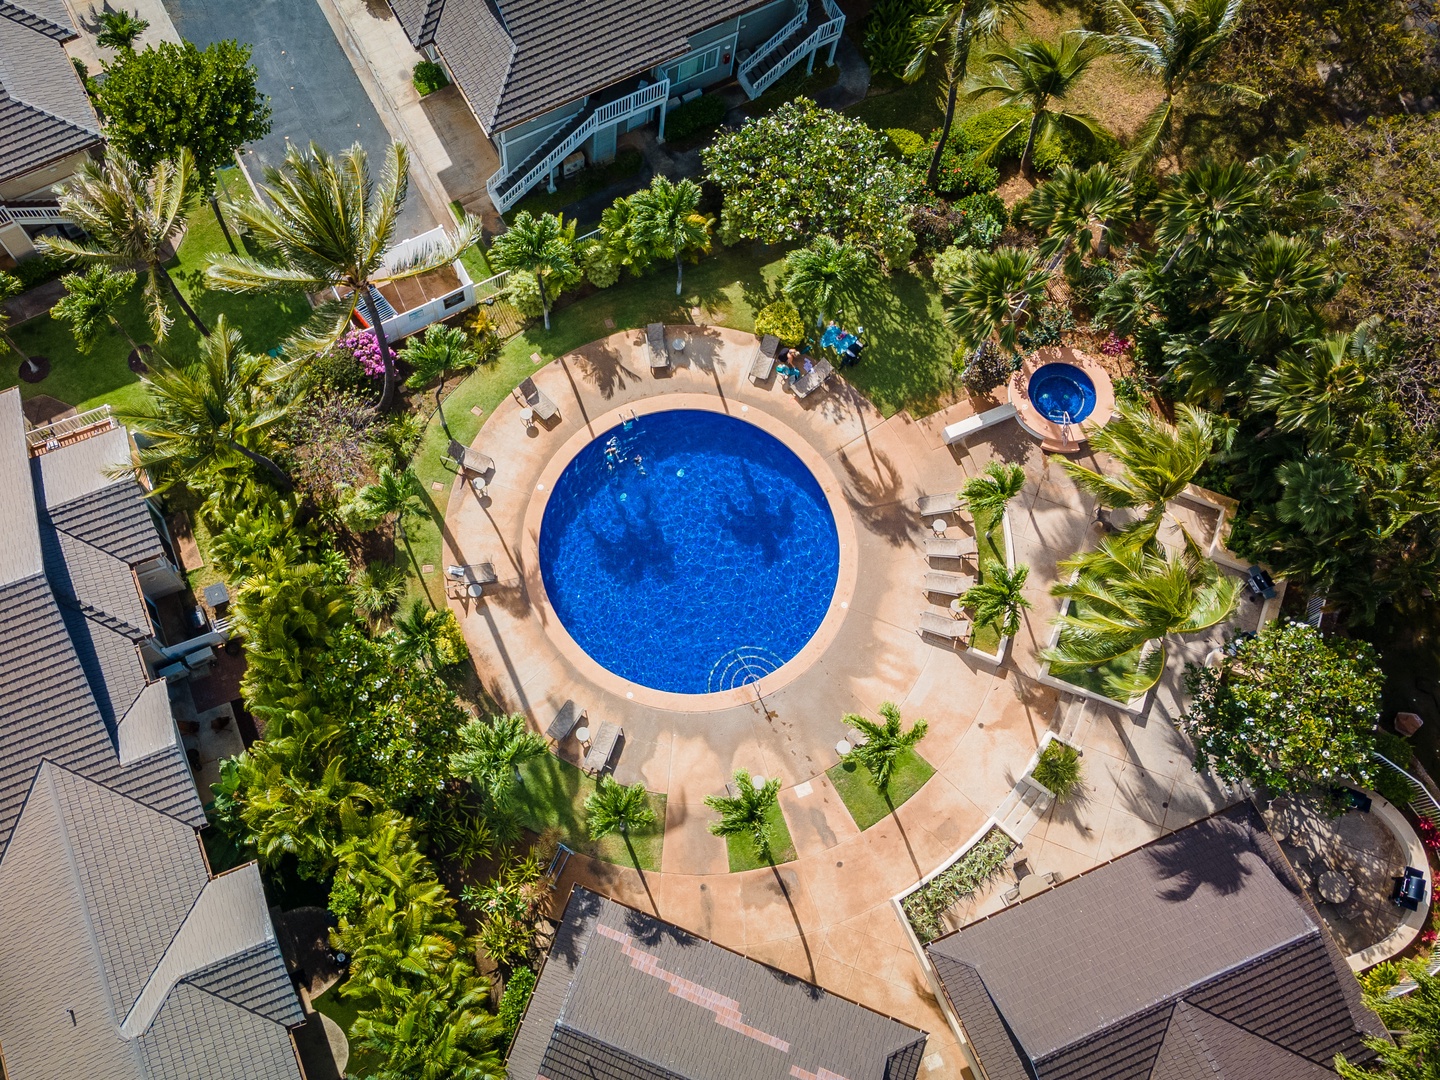 Kapolei Vacation Rentals, Fairways at Ko Olina 4A - The tropical surroundings of the pool and hot tub.